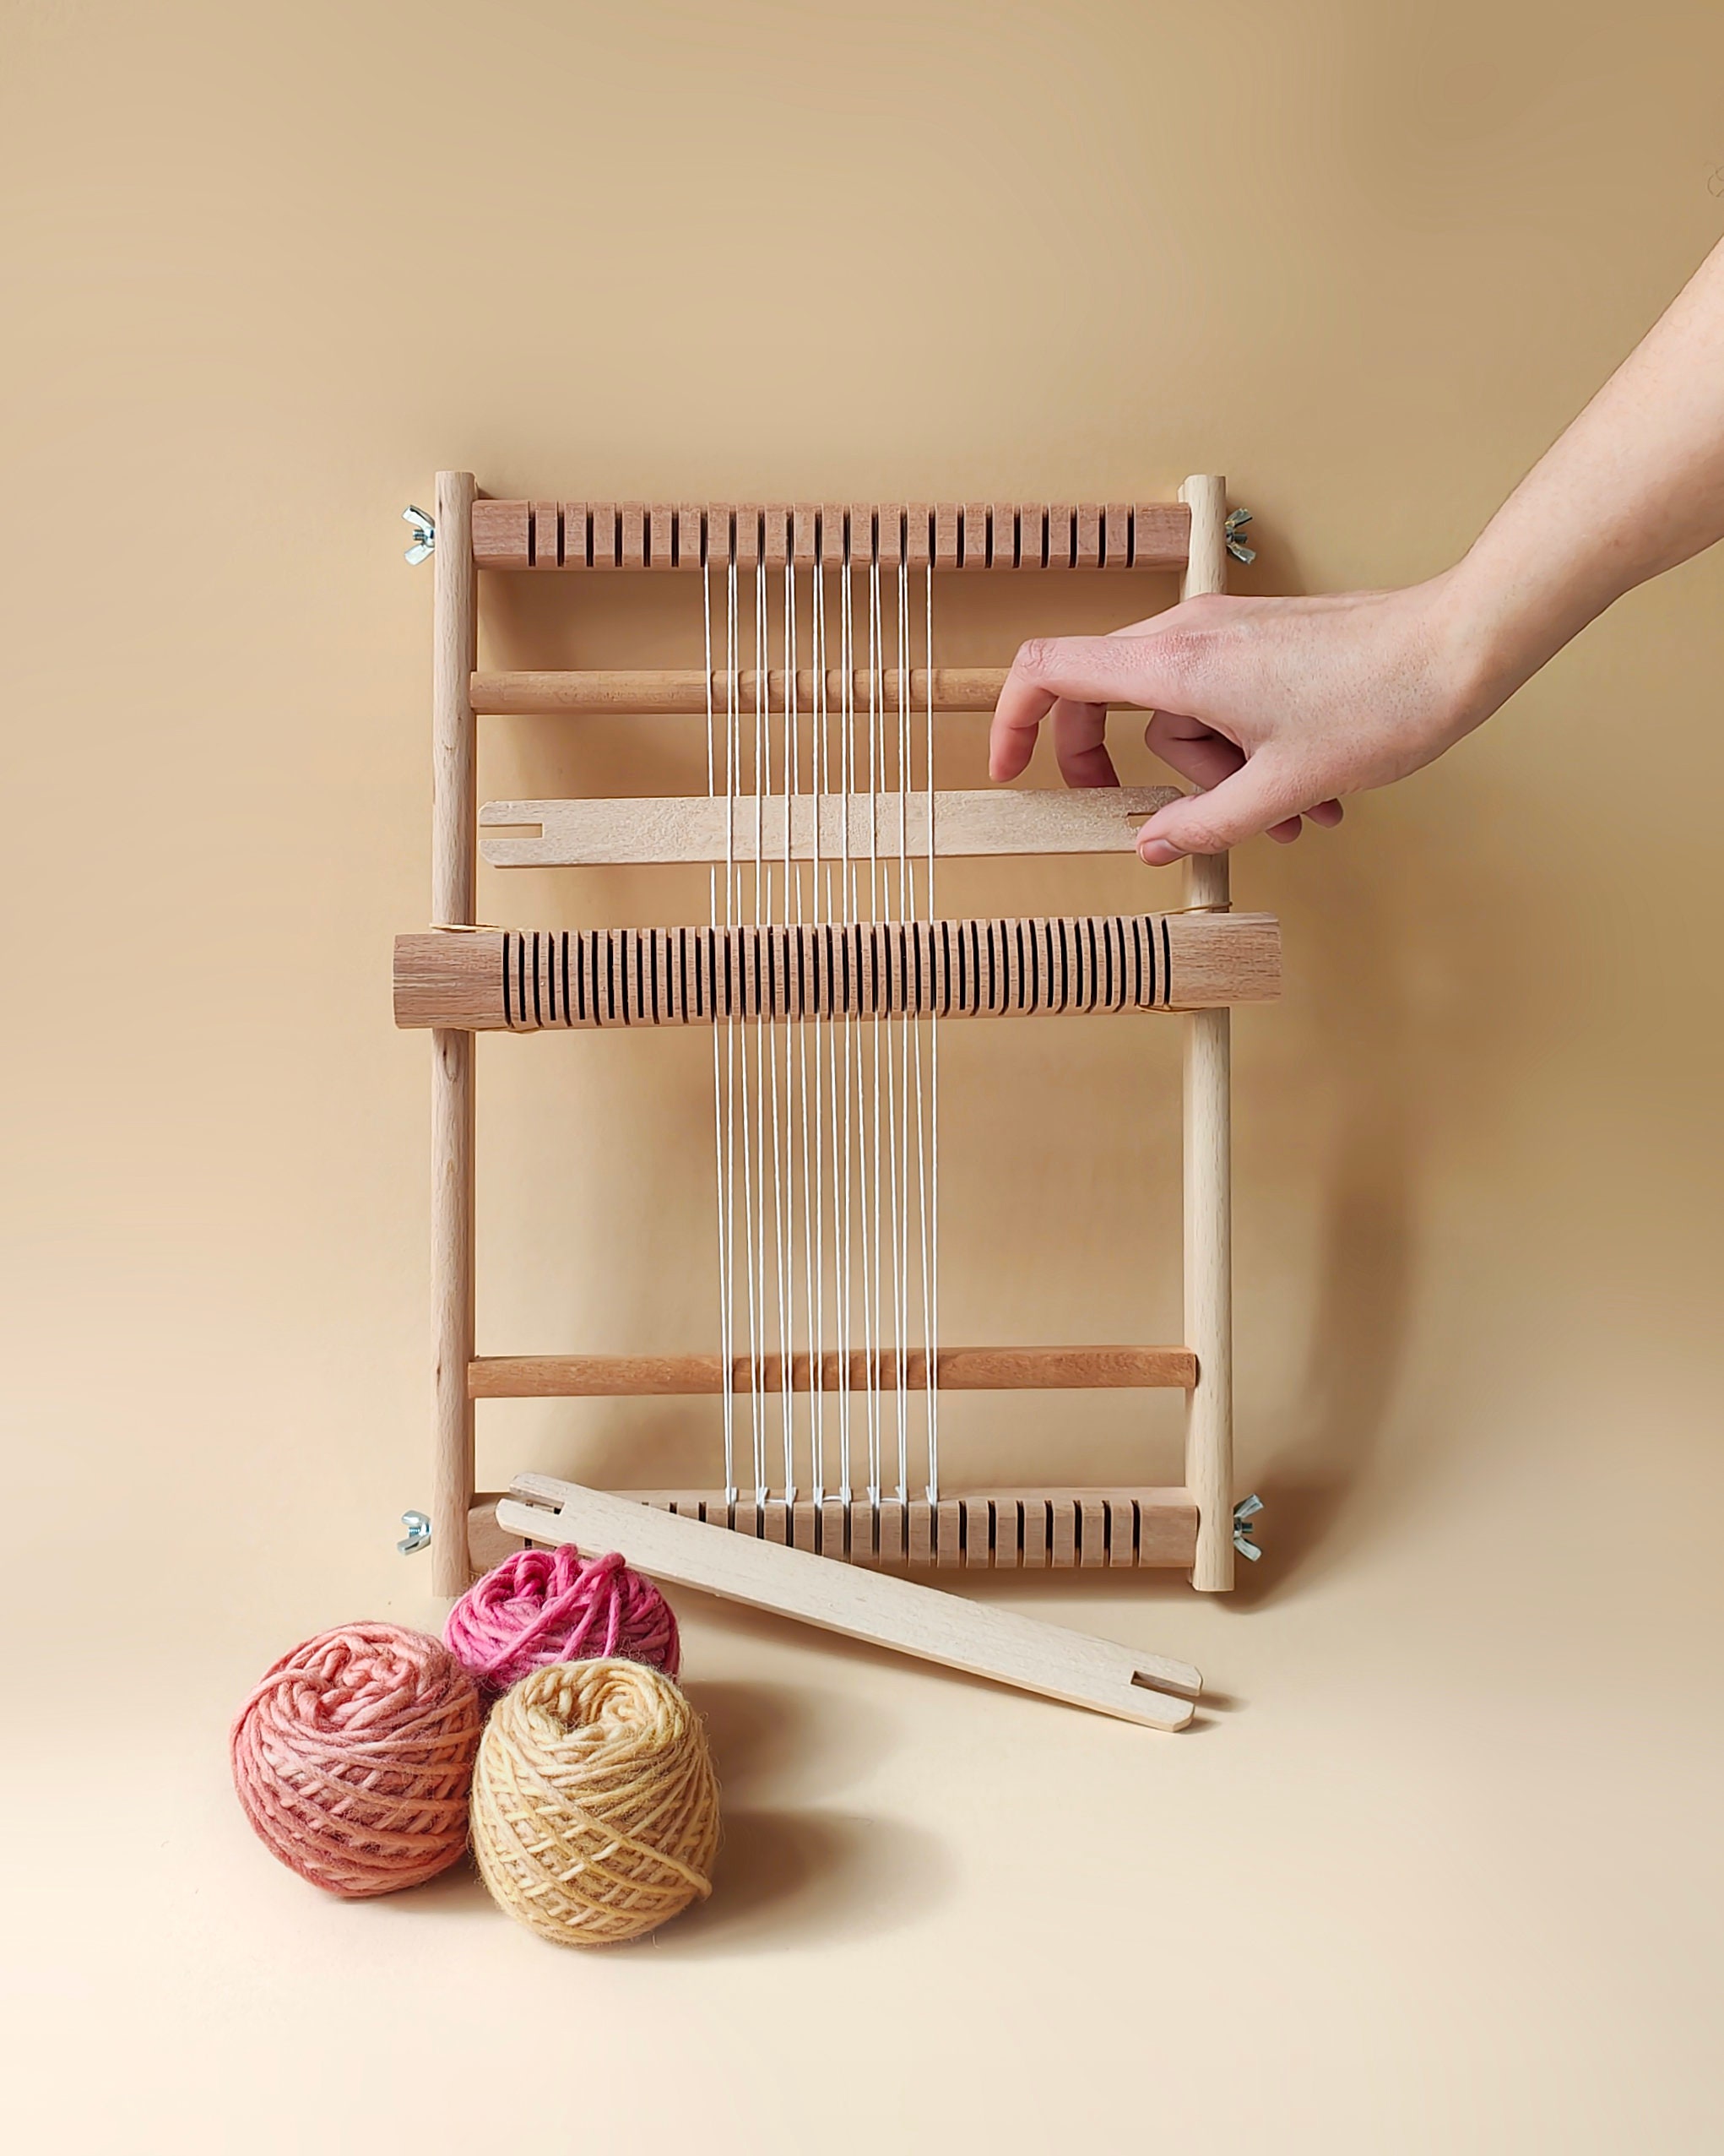 X Large Weaving Loom Kit, Also Known as Tapestry Weave Loom Lap Heddle Loom  With Stand, Weave Frame Loom, for Beginners DIY 